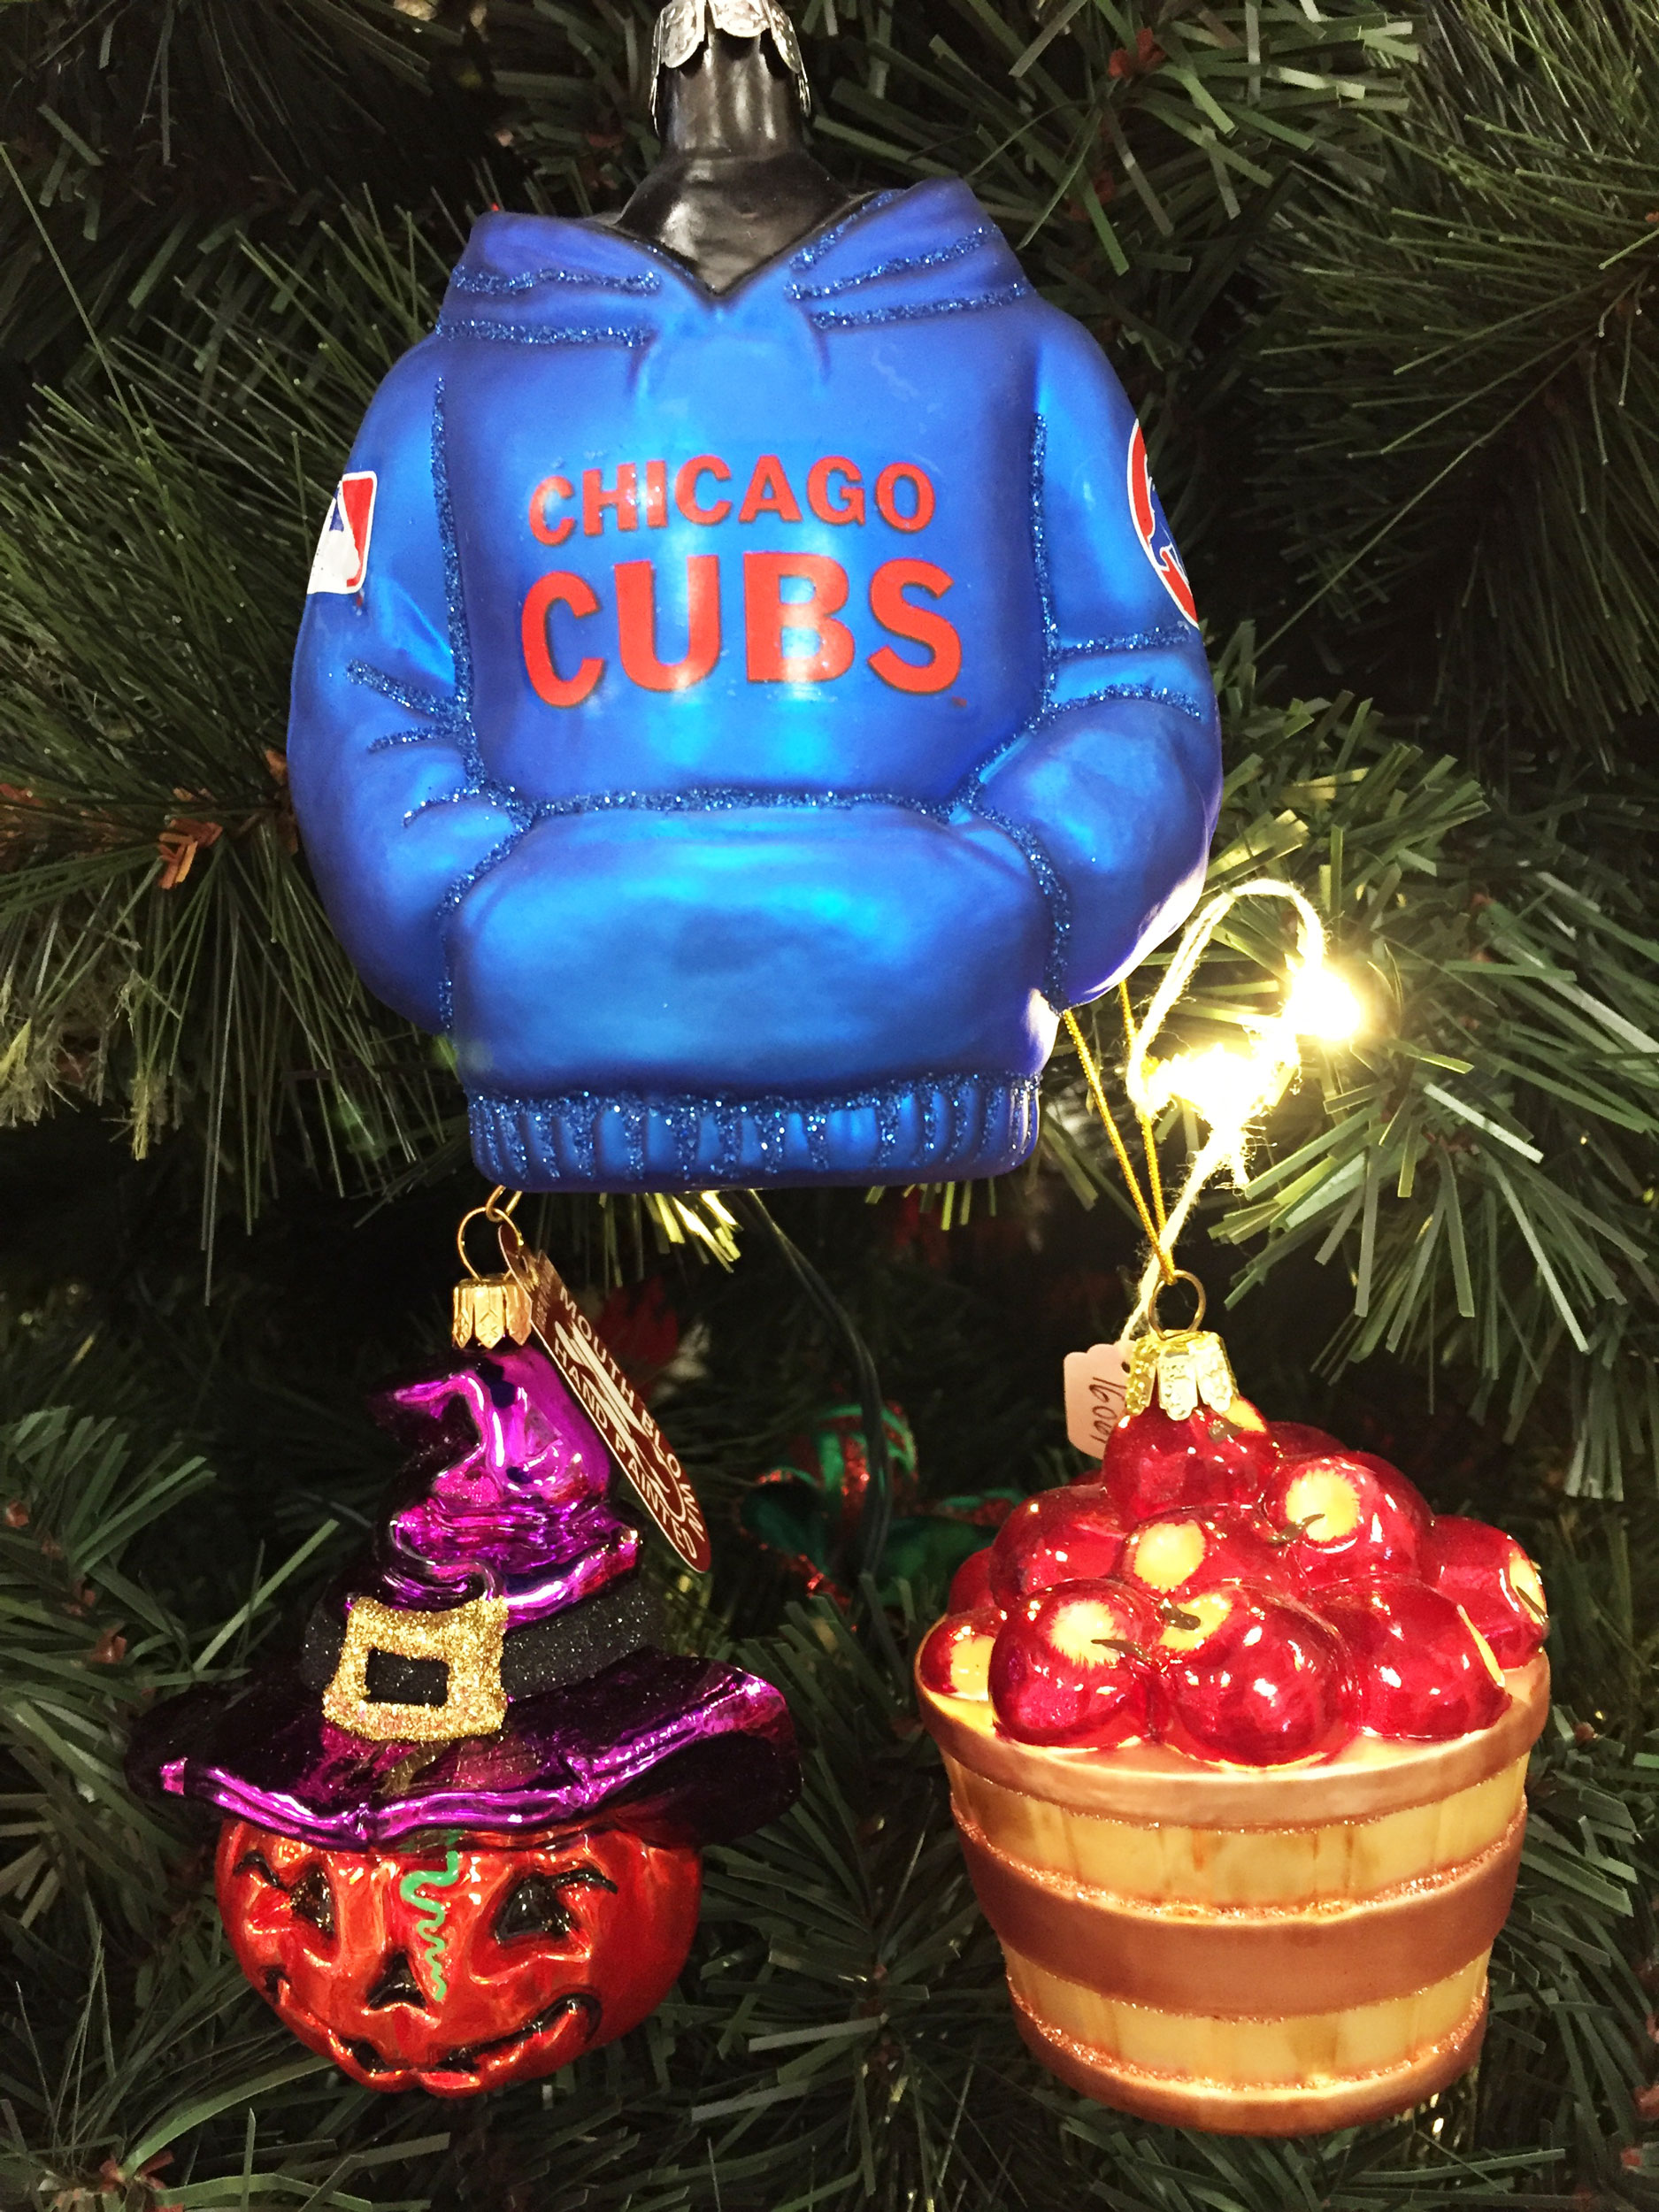 Ornaments of a Cubs hoodie, a carved pumpkin and a basket of apples celebrating the first day of fall. | OrnamentShop.com